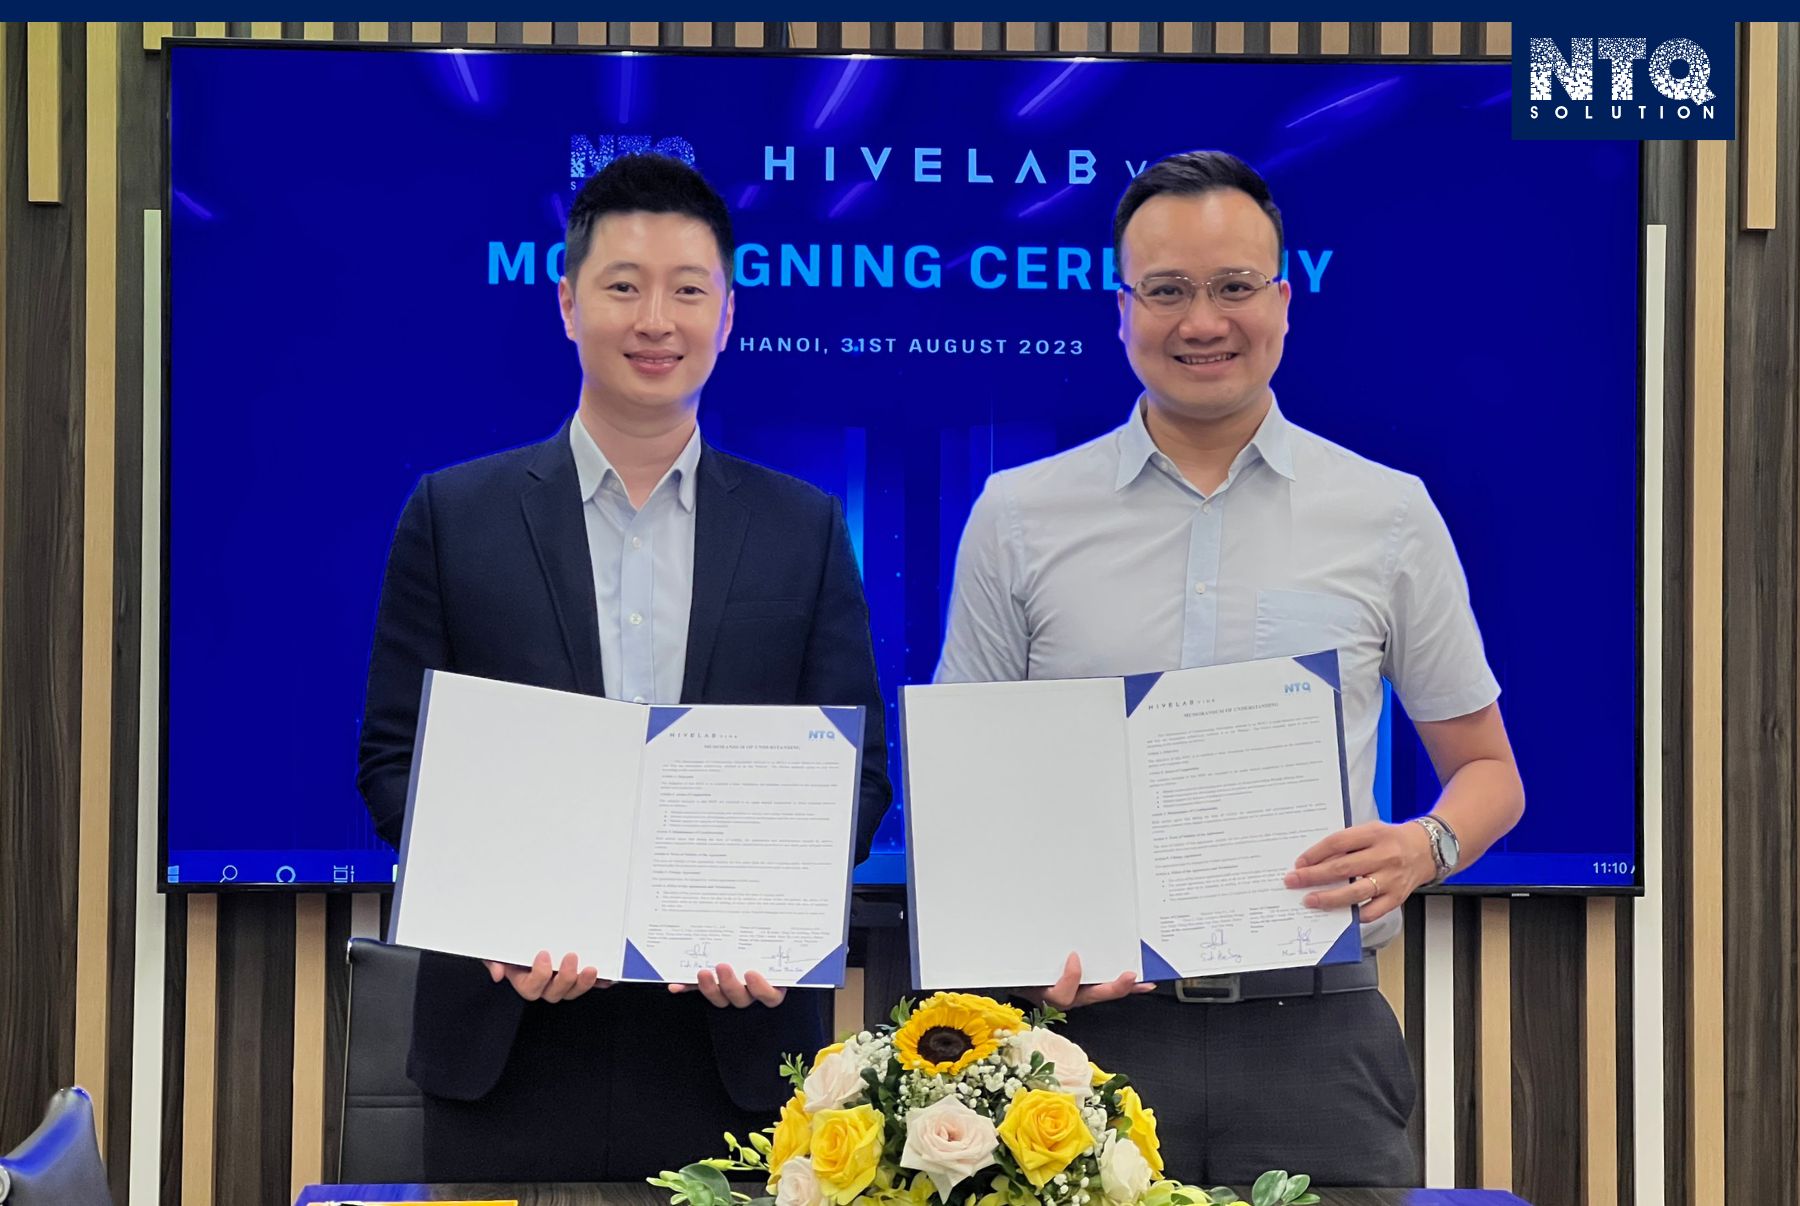 NTQ Solution To Sign MOU With Hivelab Vina To Develop Multimedia Design Solutions For Global Clients